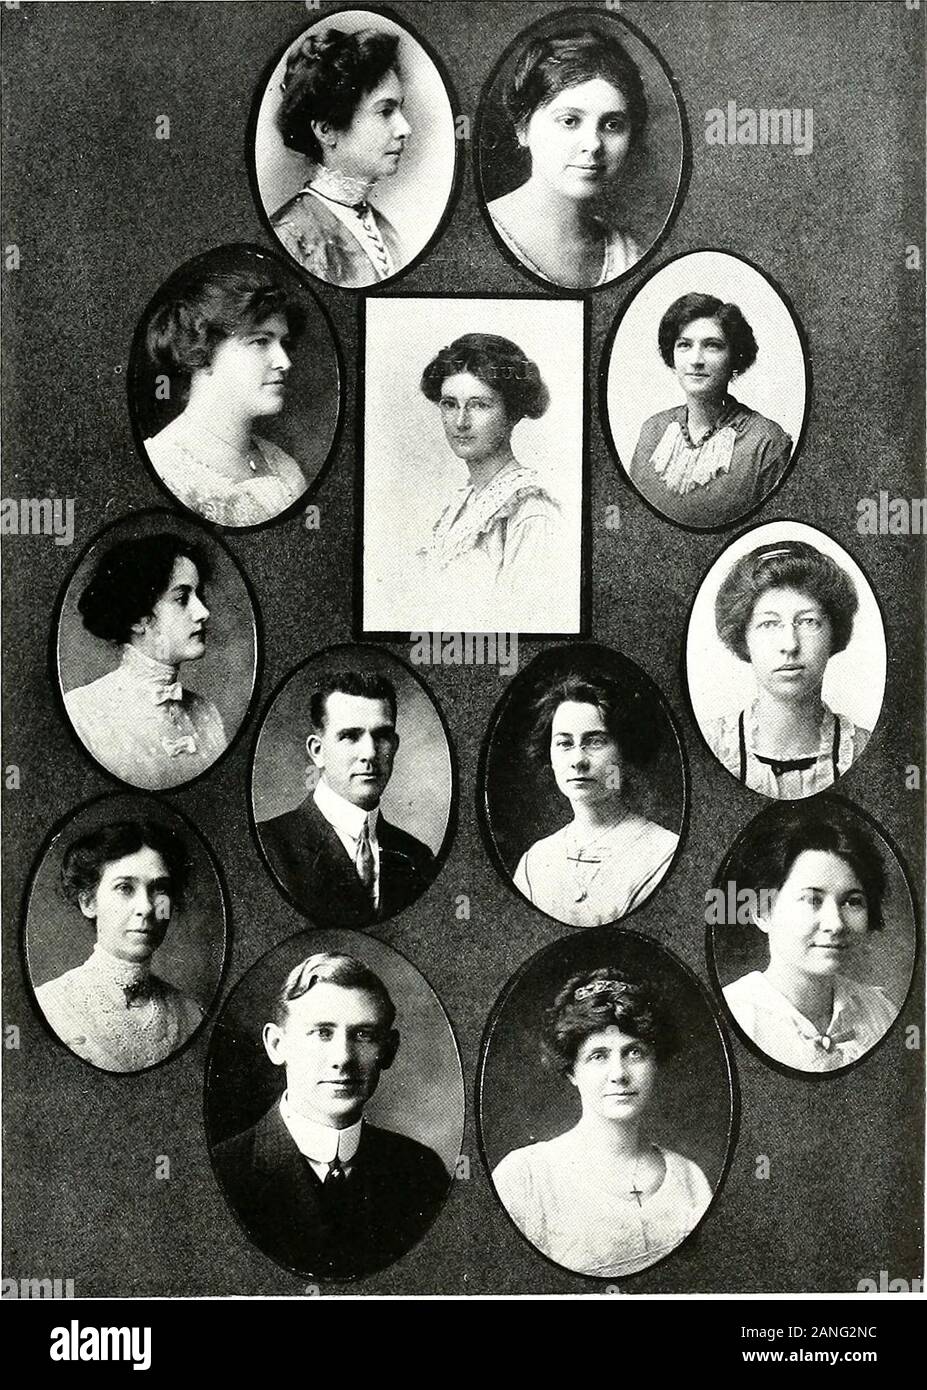 Technala . Officers in Instruction Art Hakdixia B. HowieM uiv E. McMillanEllen H. Forsythe (ommercial Mary Betty OvertonElla Peters Domestic Art Martha Patterson, 15.S. Edna M. Carr Mamie Mekoney Mildred K. Clark Mary E. McMillan Ellen H. Forsythe Domestic Science Louisa Keys, B.S.Bessie H. Jeter Education, Psychology, Sociology Mollie A. Geiss, A.B. English Claudia E. Crumpton, A.M.Willie I. Jenkins, A.B. L. Rook SimmonsMinna Gayle Palfrey Expression Annie M. Clisby French Virginia Reese Withers, A.B. History Luther J. FowlerEdward H. Wills, B.S.. Latin Julia Poynor, A.B. Mathematics Mary G. Stock Photo